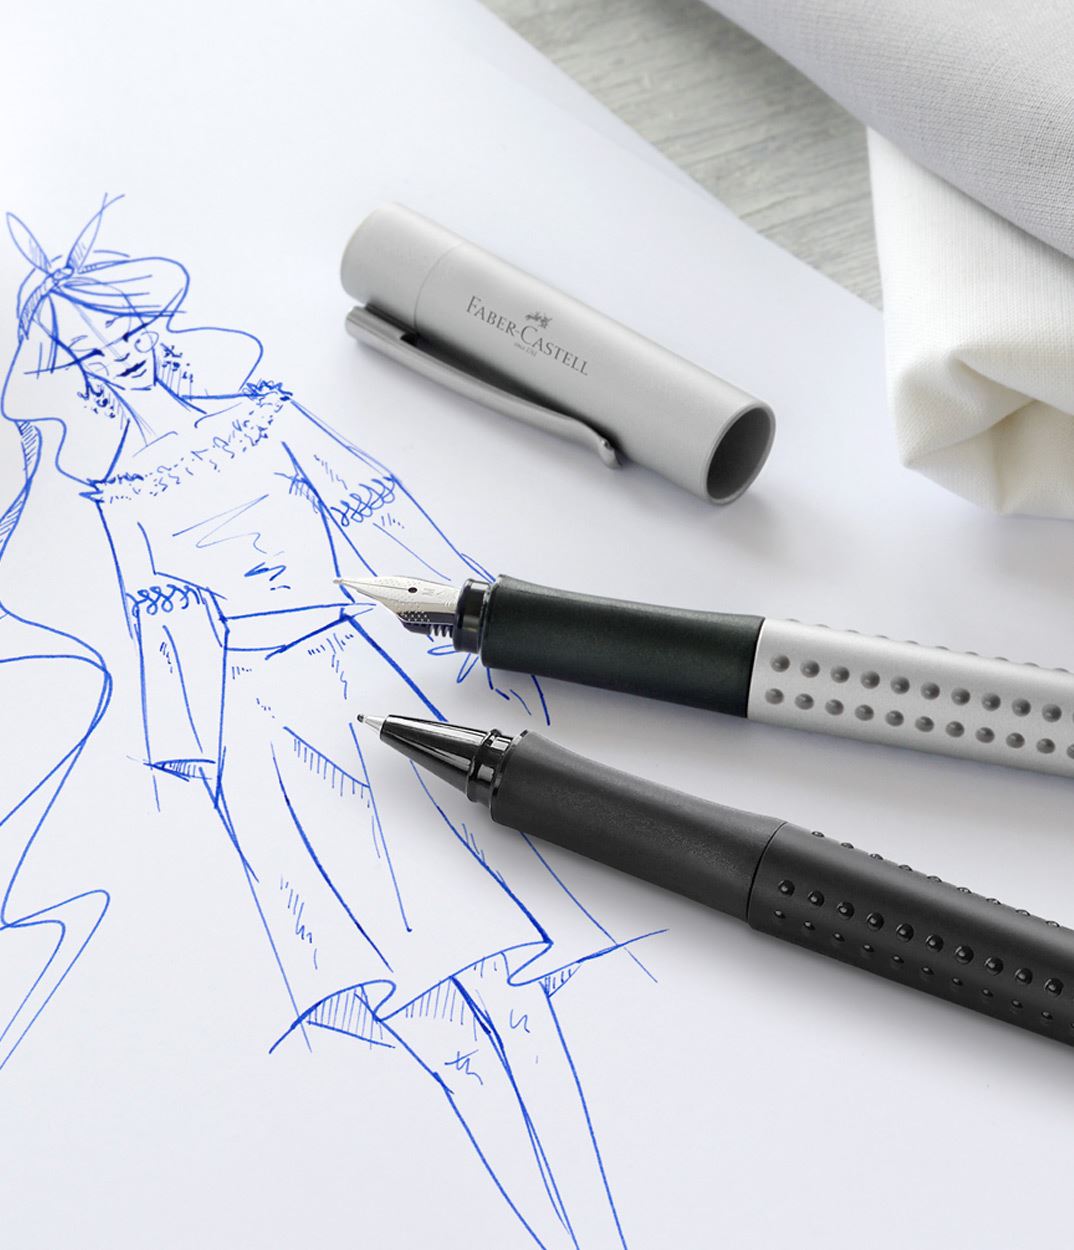 Grey grip fountain pen and black grip finewriter lying on a paper with a blue fashion drawing.